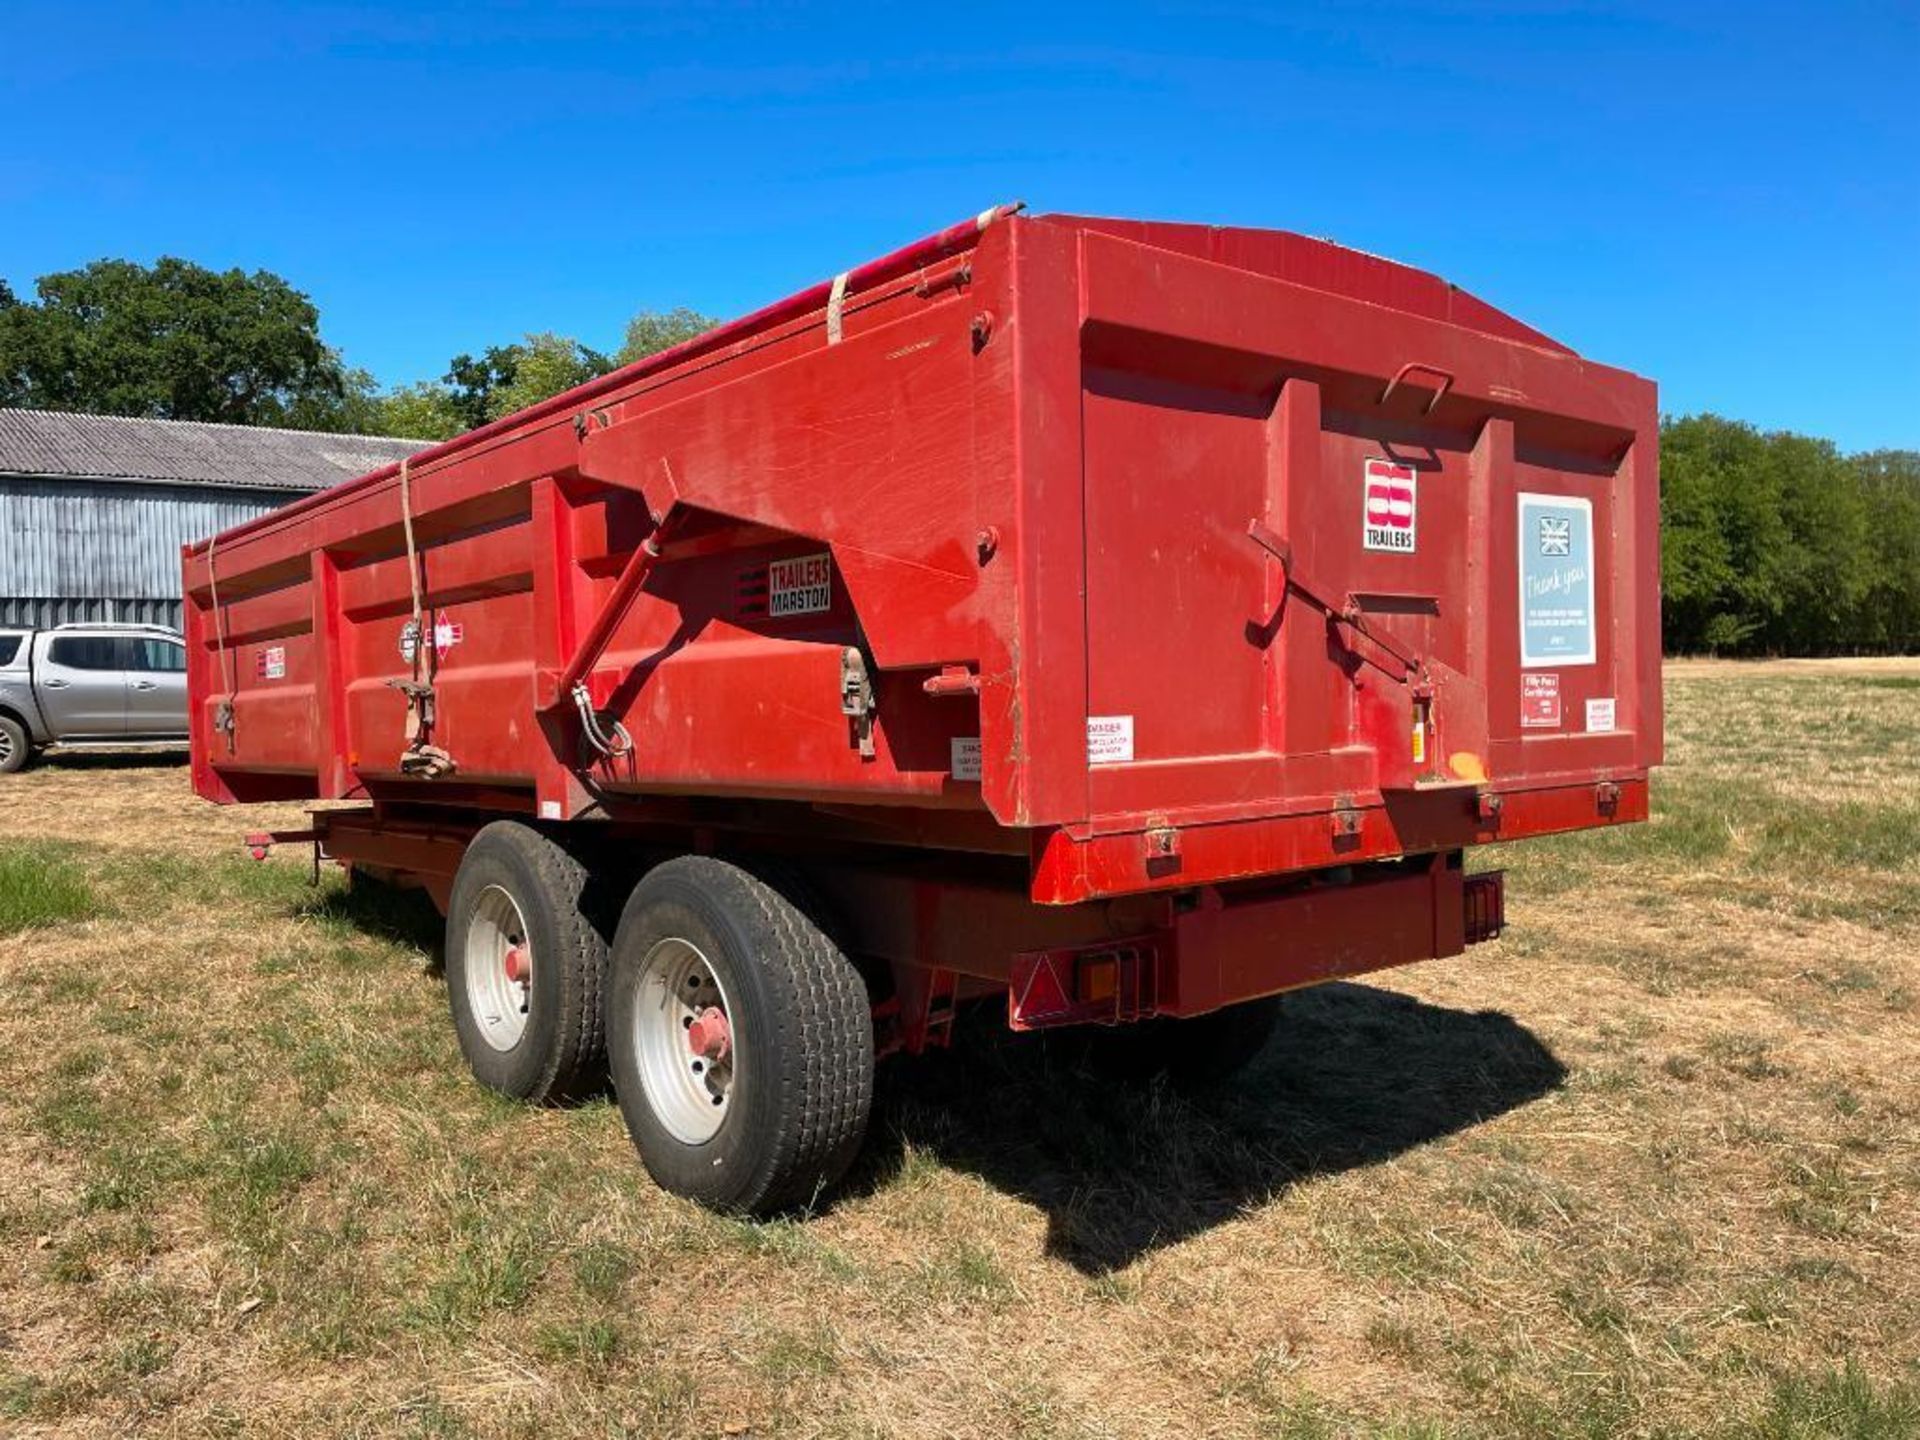 2008 AS Marston ACE Fen 14 14t grain trailer with sprung drawbar, rollover sheet, hydraulic tailgate - Image 9 of 10